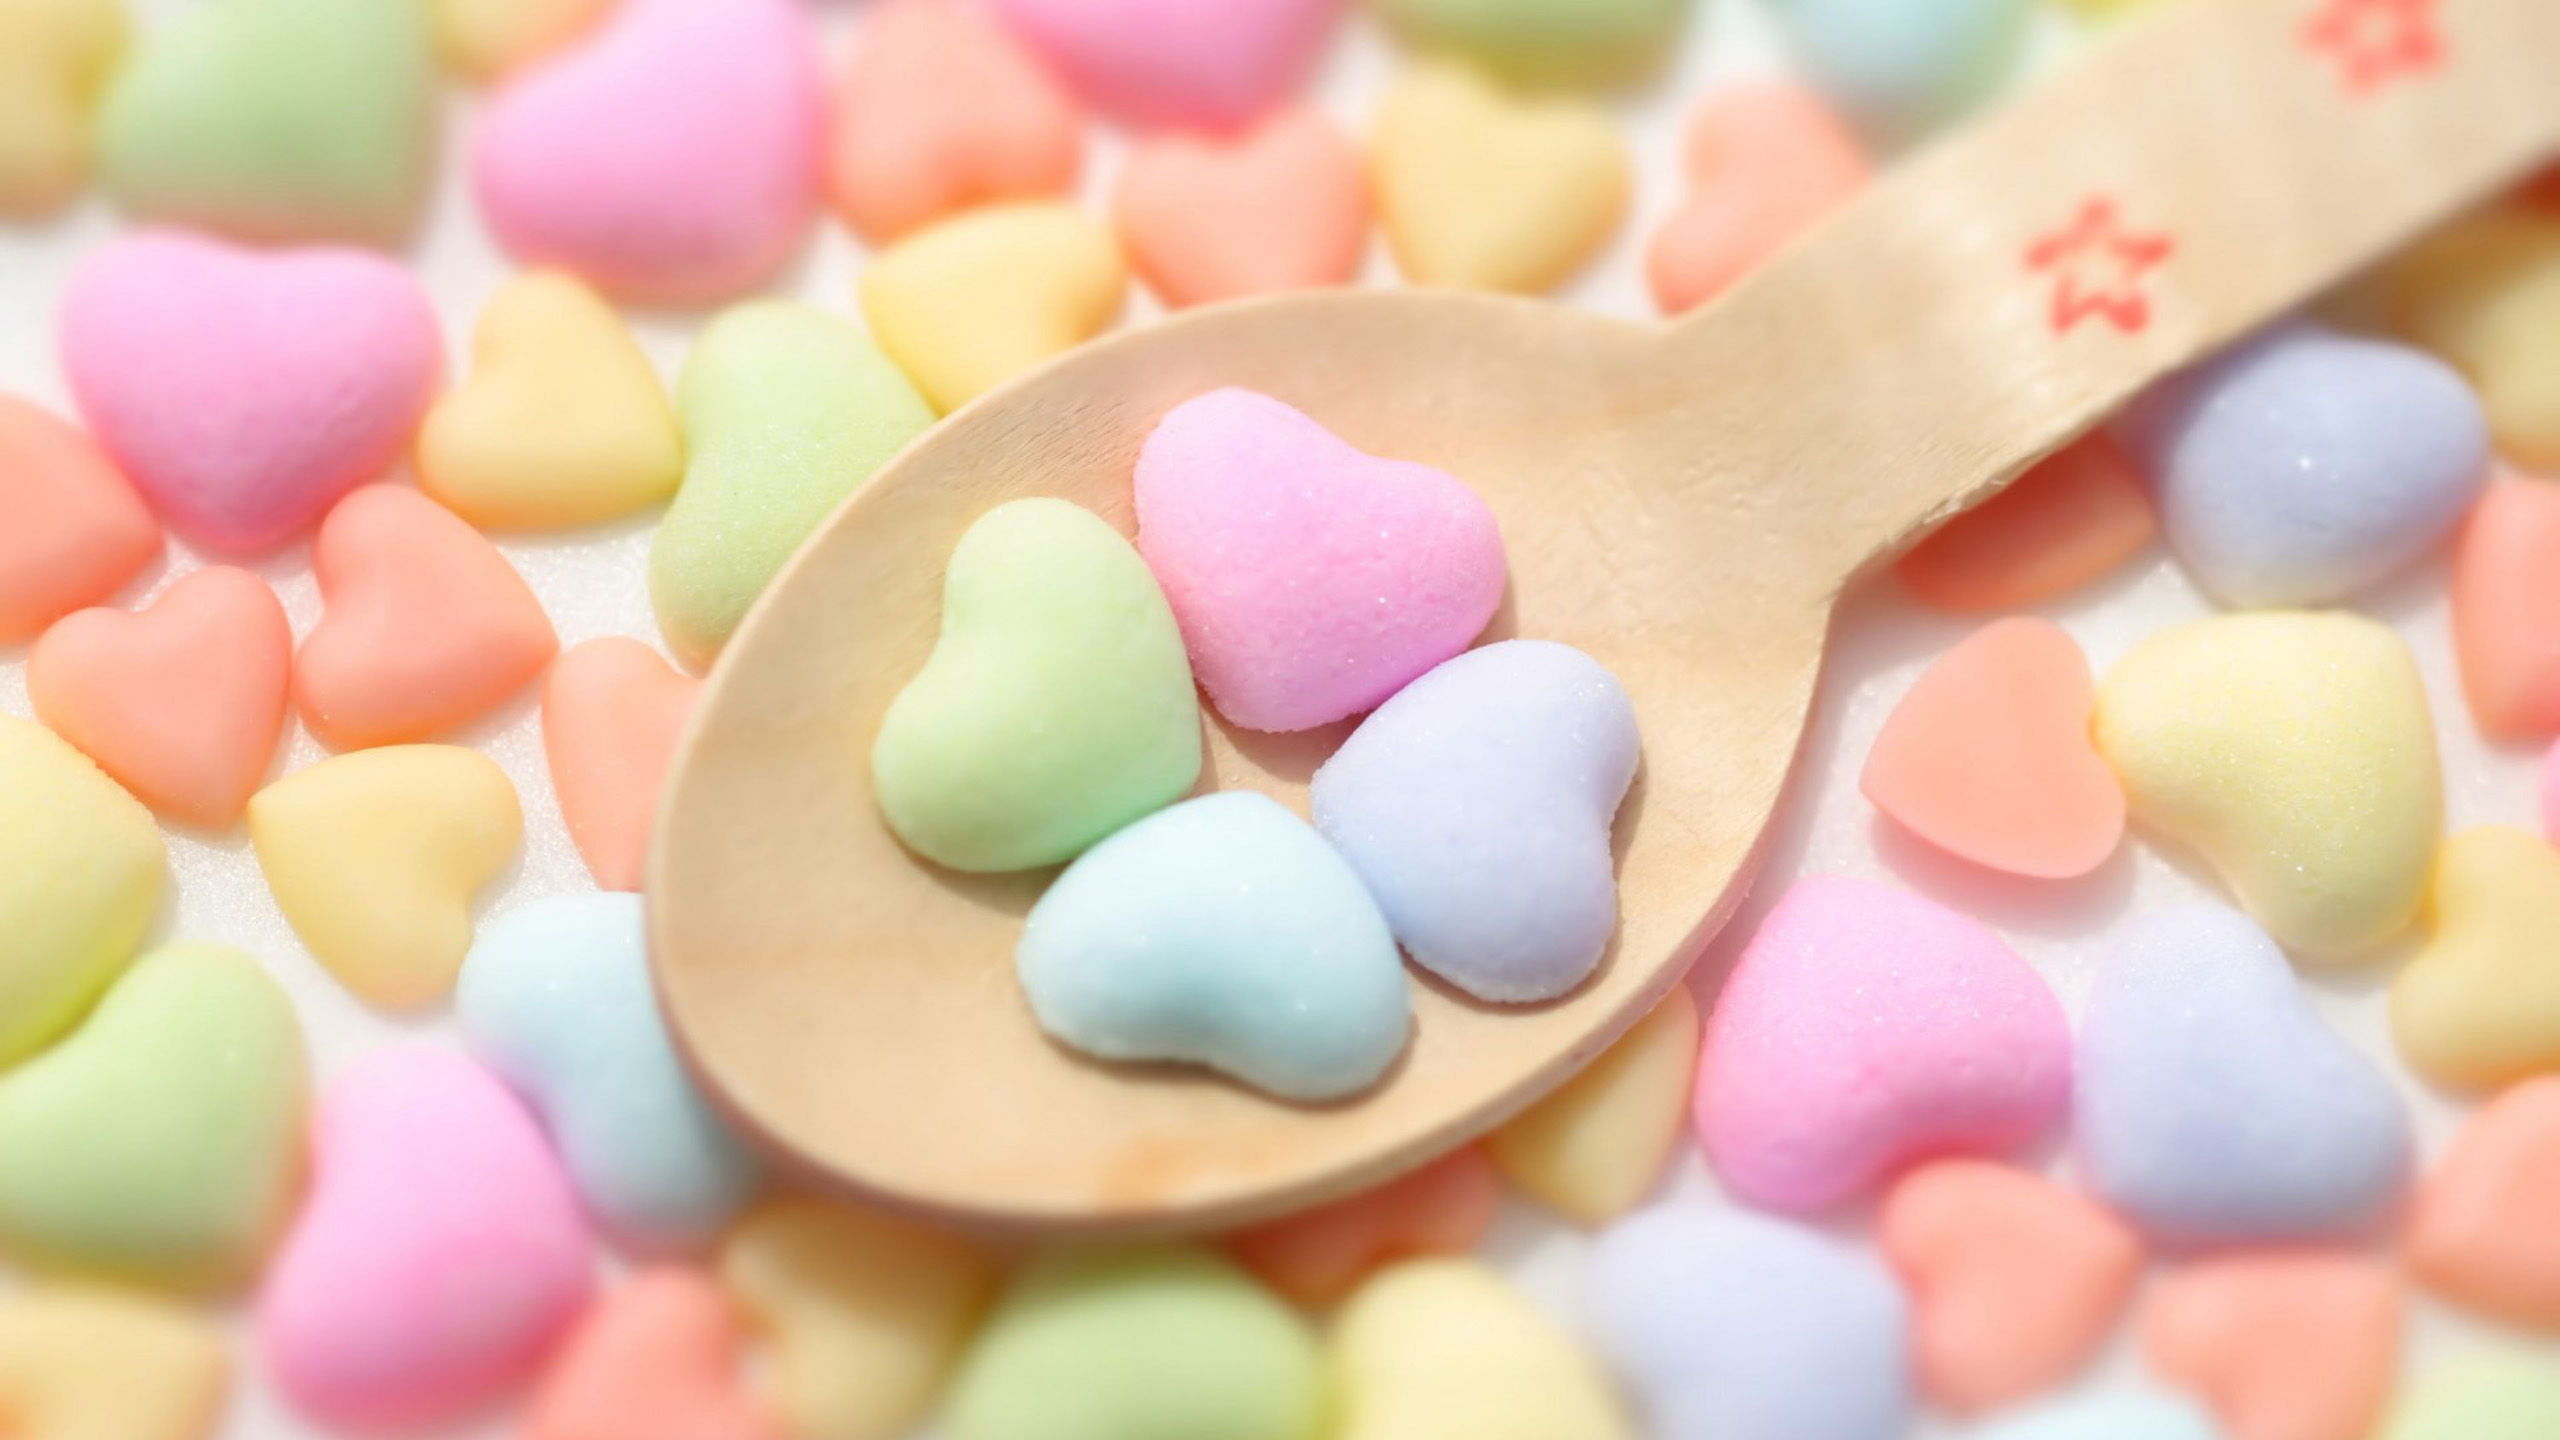 Candy Hearts Wallpaper Background 65329 2560x1440px